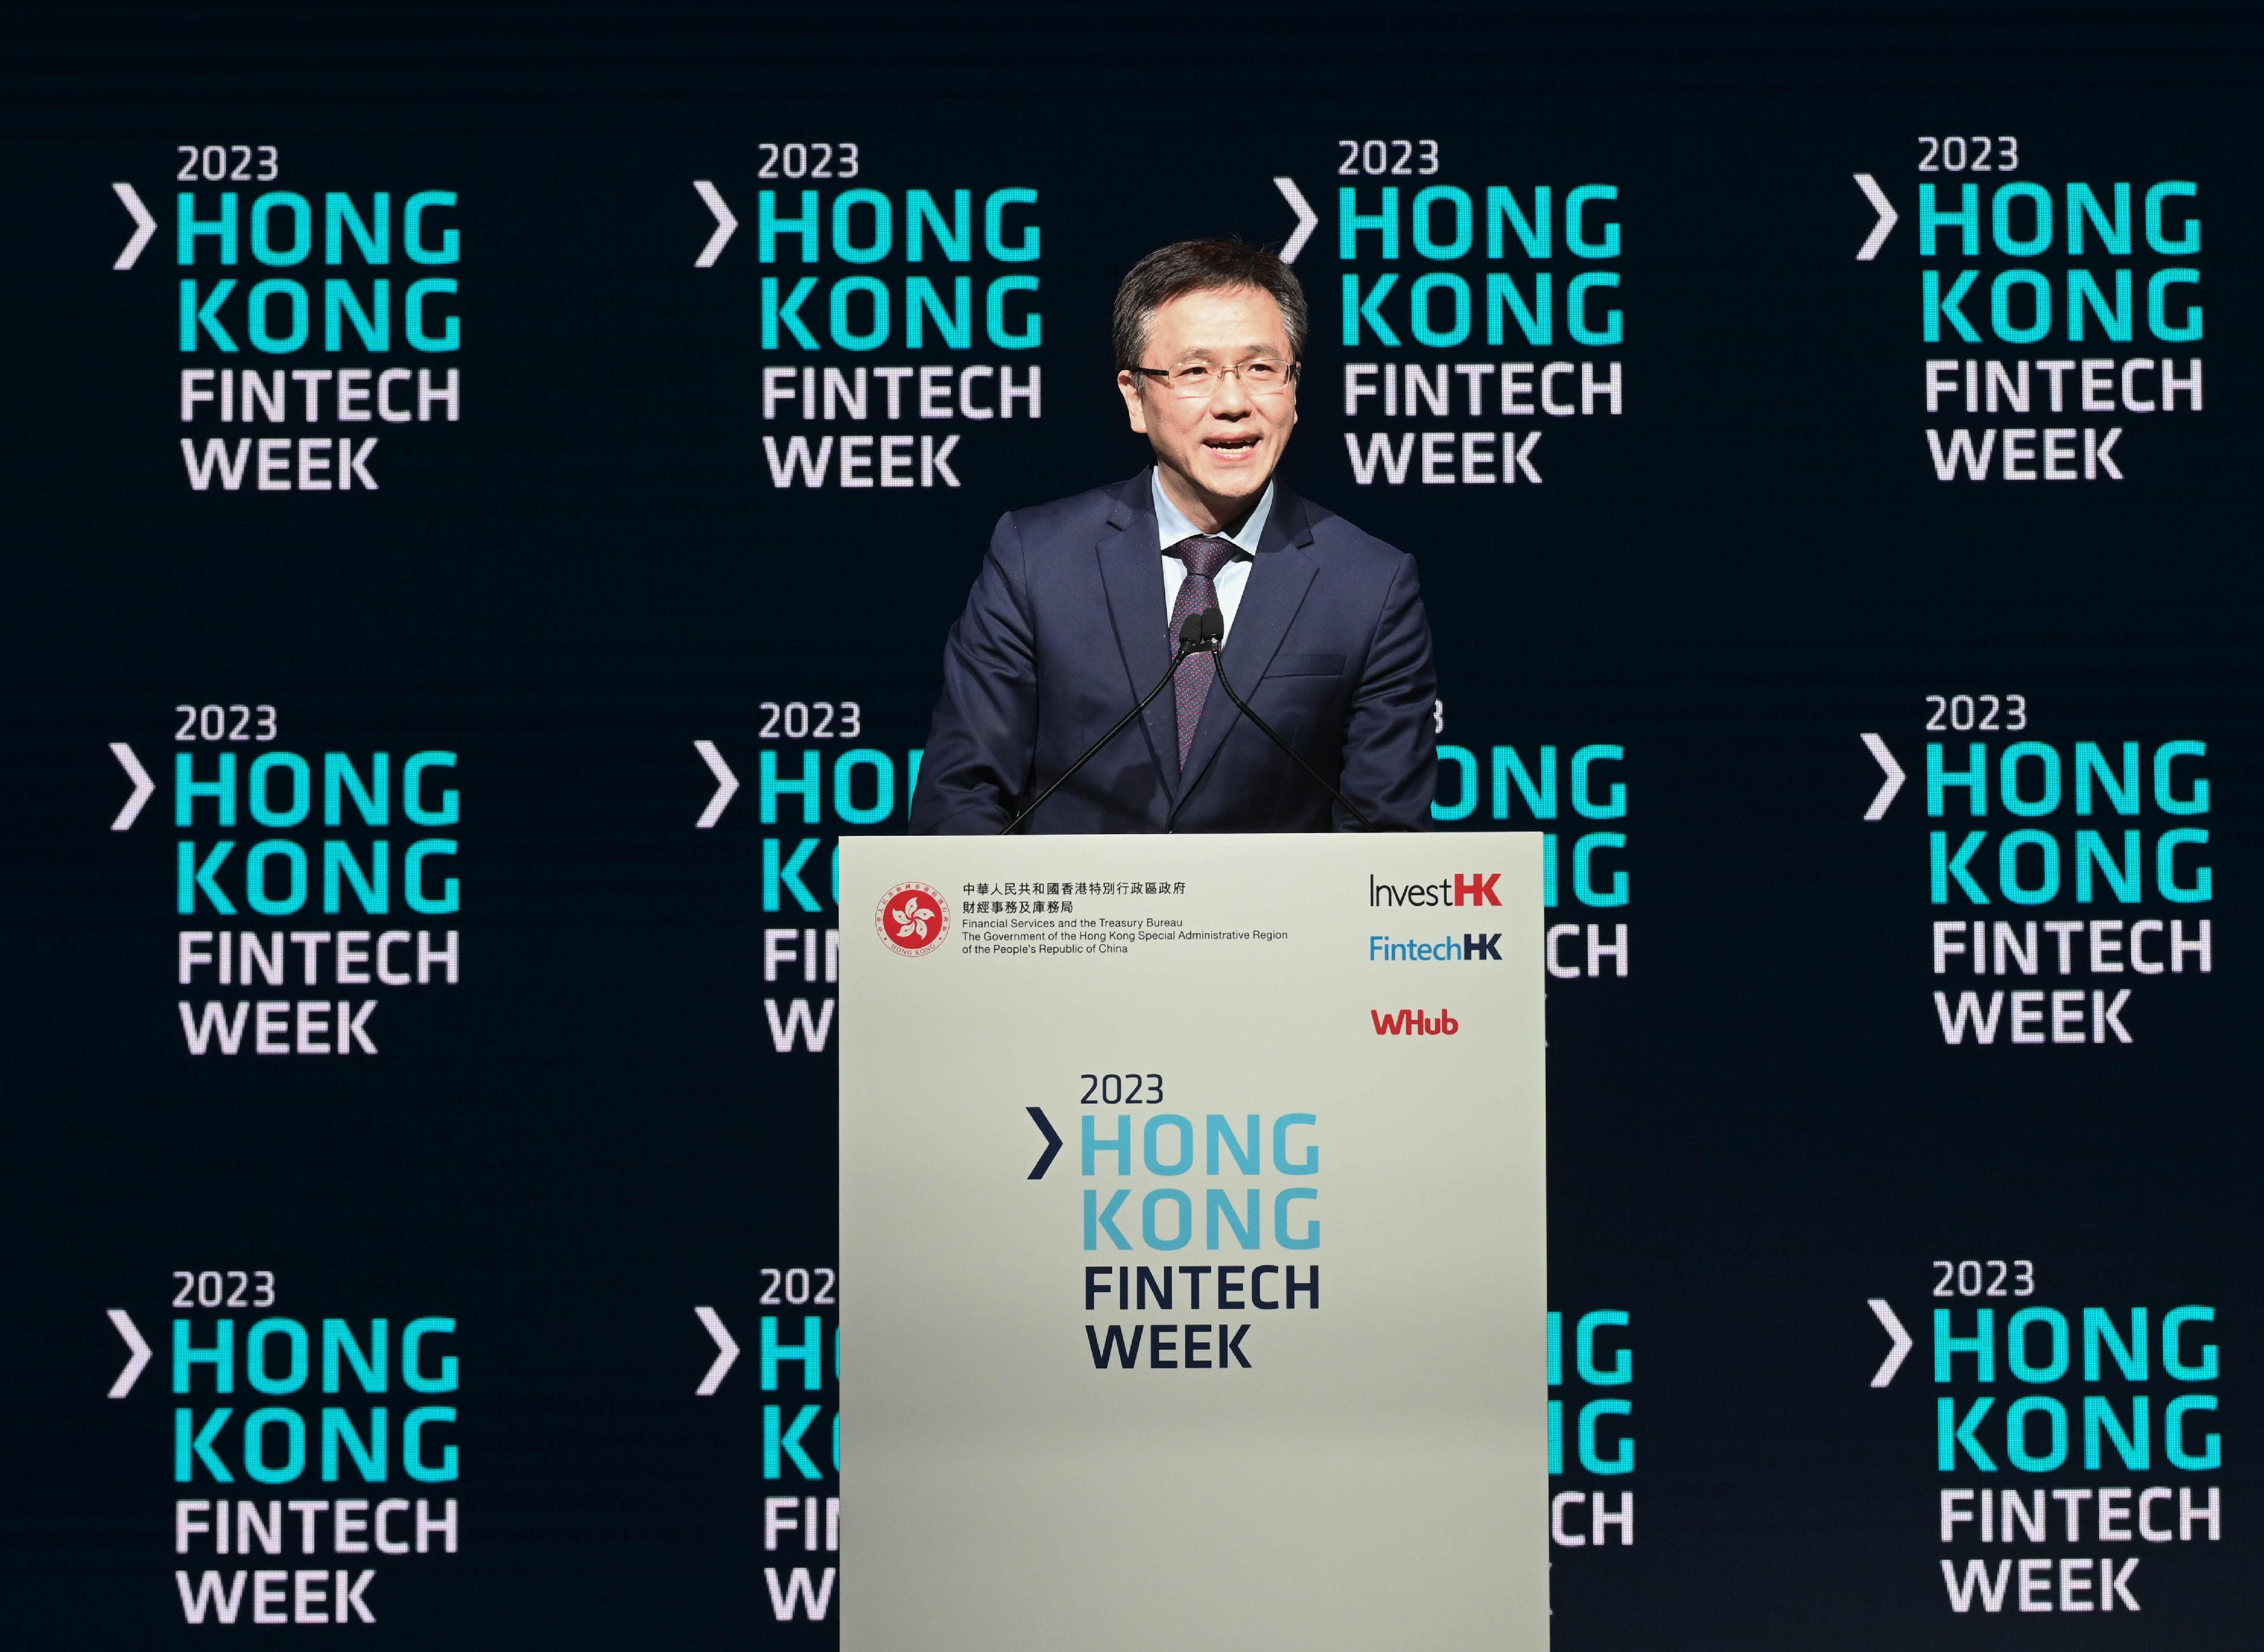 Hong Kong FinTech Week 2023 concluded on November 5, capping off a week-long feast of fintech that included the Greater Bay Area Day on October 31 and the two-day main conference on November 2 and 3. Photo shows the Secretary for Innovation, Technology and Industry, Professor Sun Dong, speaking at the Hong Kong FinTech Week 2023 on November 3.